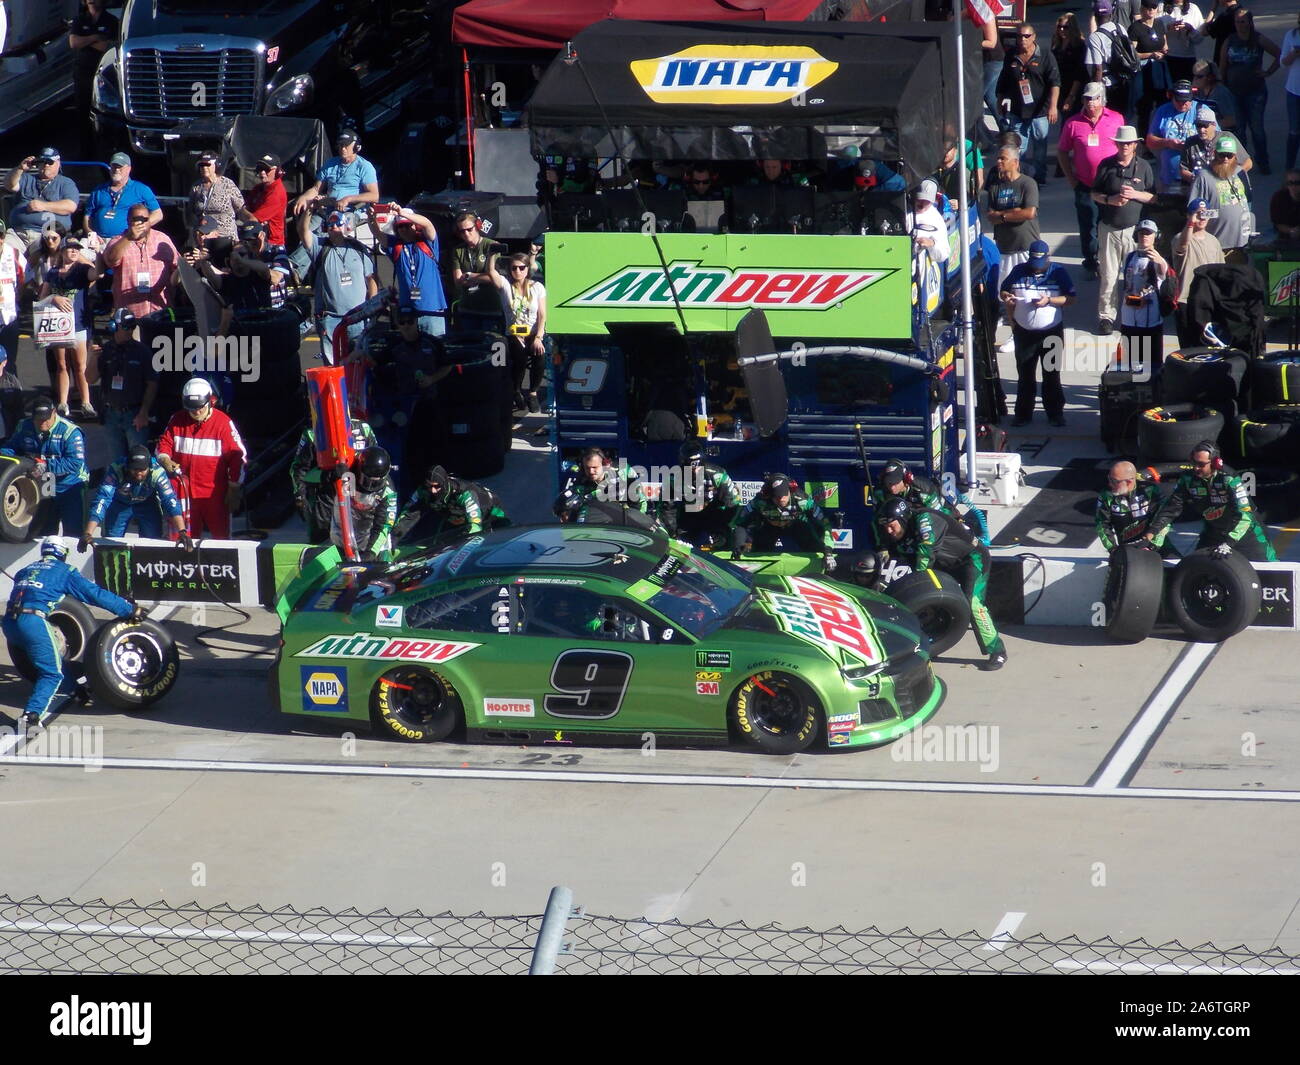 Chase Eliot Pit Stop Nascar Stock Car Racing at Martinsville Speedway Virginia Stock Photo